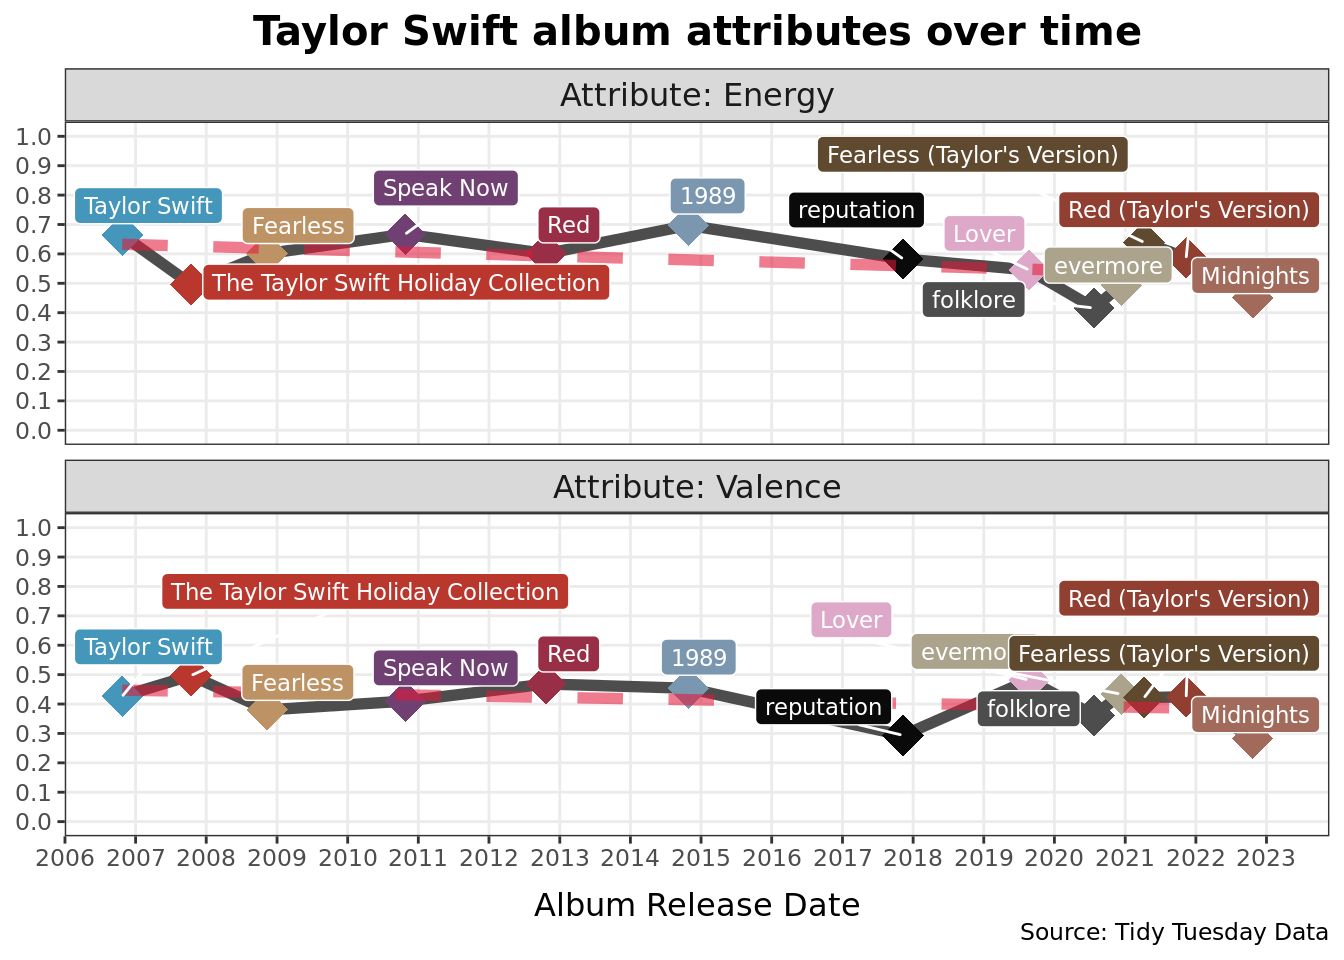 This figure is a point and line plot titled "Taylor Swift album attributes over time" that displays the average energy and valence values of each Taylor swift album along the date at which the album was released. Each album is represented by a point, colored to match the album cover, and labeled witht eh album name. Also, each point is connected by a line to show the change from one album to the next in terms of energy/valence respectively. Under each set of albums is a dotted red line that displays the average change over time among each of these values. The red dotted line along with the rest of the plot show that there is a slight decrease, but seemingly insignificant, decrease in both energy and valence scores of her albums over time.